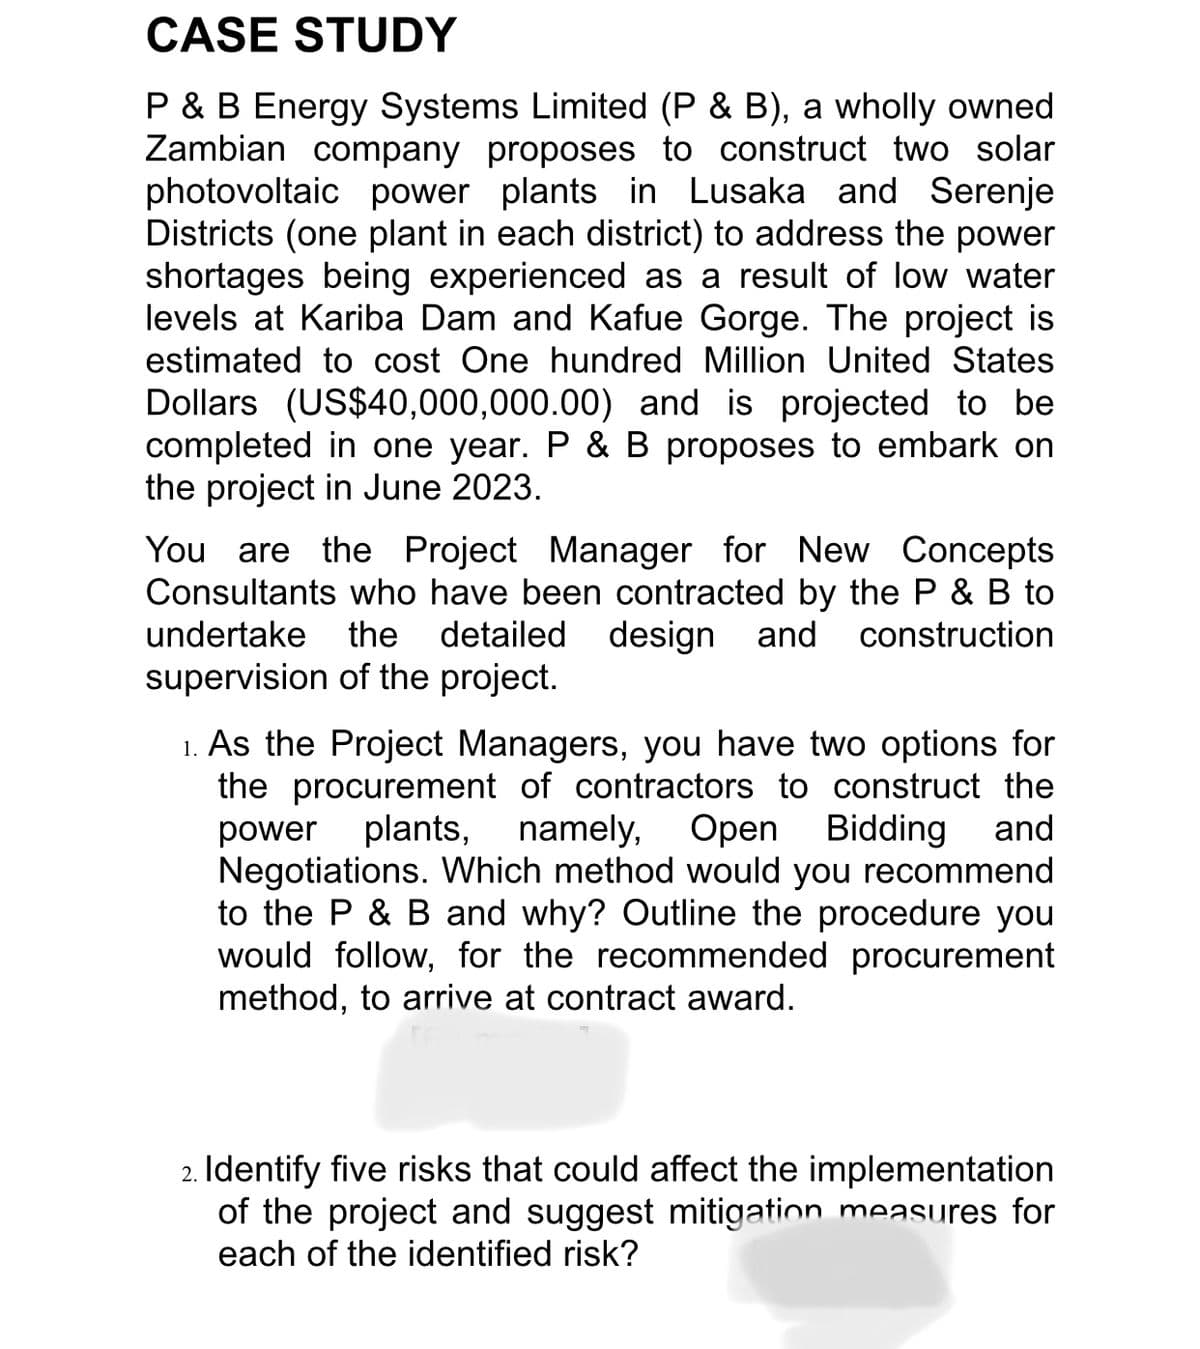 CASE STUDY
P & B Energy Systems Limited (P & B), a wholly owned
Zambian company proposes to construct two solar
photovoltaic power plants in Lusaka and Serenje
Districts (one plant in each district) to address the power
shortages being experienced as a result of low water
levels at Kariba Dam and Kafue Gorge. The project is
estimated to cost One hundred Million United States
Dollars (US$40,000,000.00) and is projected to be
completed in one year. P & B proposes to embark on
the project in June 2023.
You are the Project Manager for New Concepts
Consultants who have been contracted by the P & B to
undertake the detailed design and construction
supervision of the project.
1. As the Project Managers, you have two options for
the procurement of contractors to construct the
power plants, namely, Open
namely, Open Bidding and
Negotiations. Which method would you recommend
to the P & B and why? Outline the procedure you
would follow, for the recommended procurement
method, to arrive at contract award.
2. Identify five risks that could affect the implementation
of the project and suggest mitigation measures for
each of the identified risk?